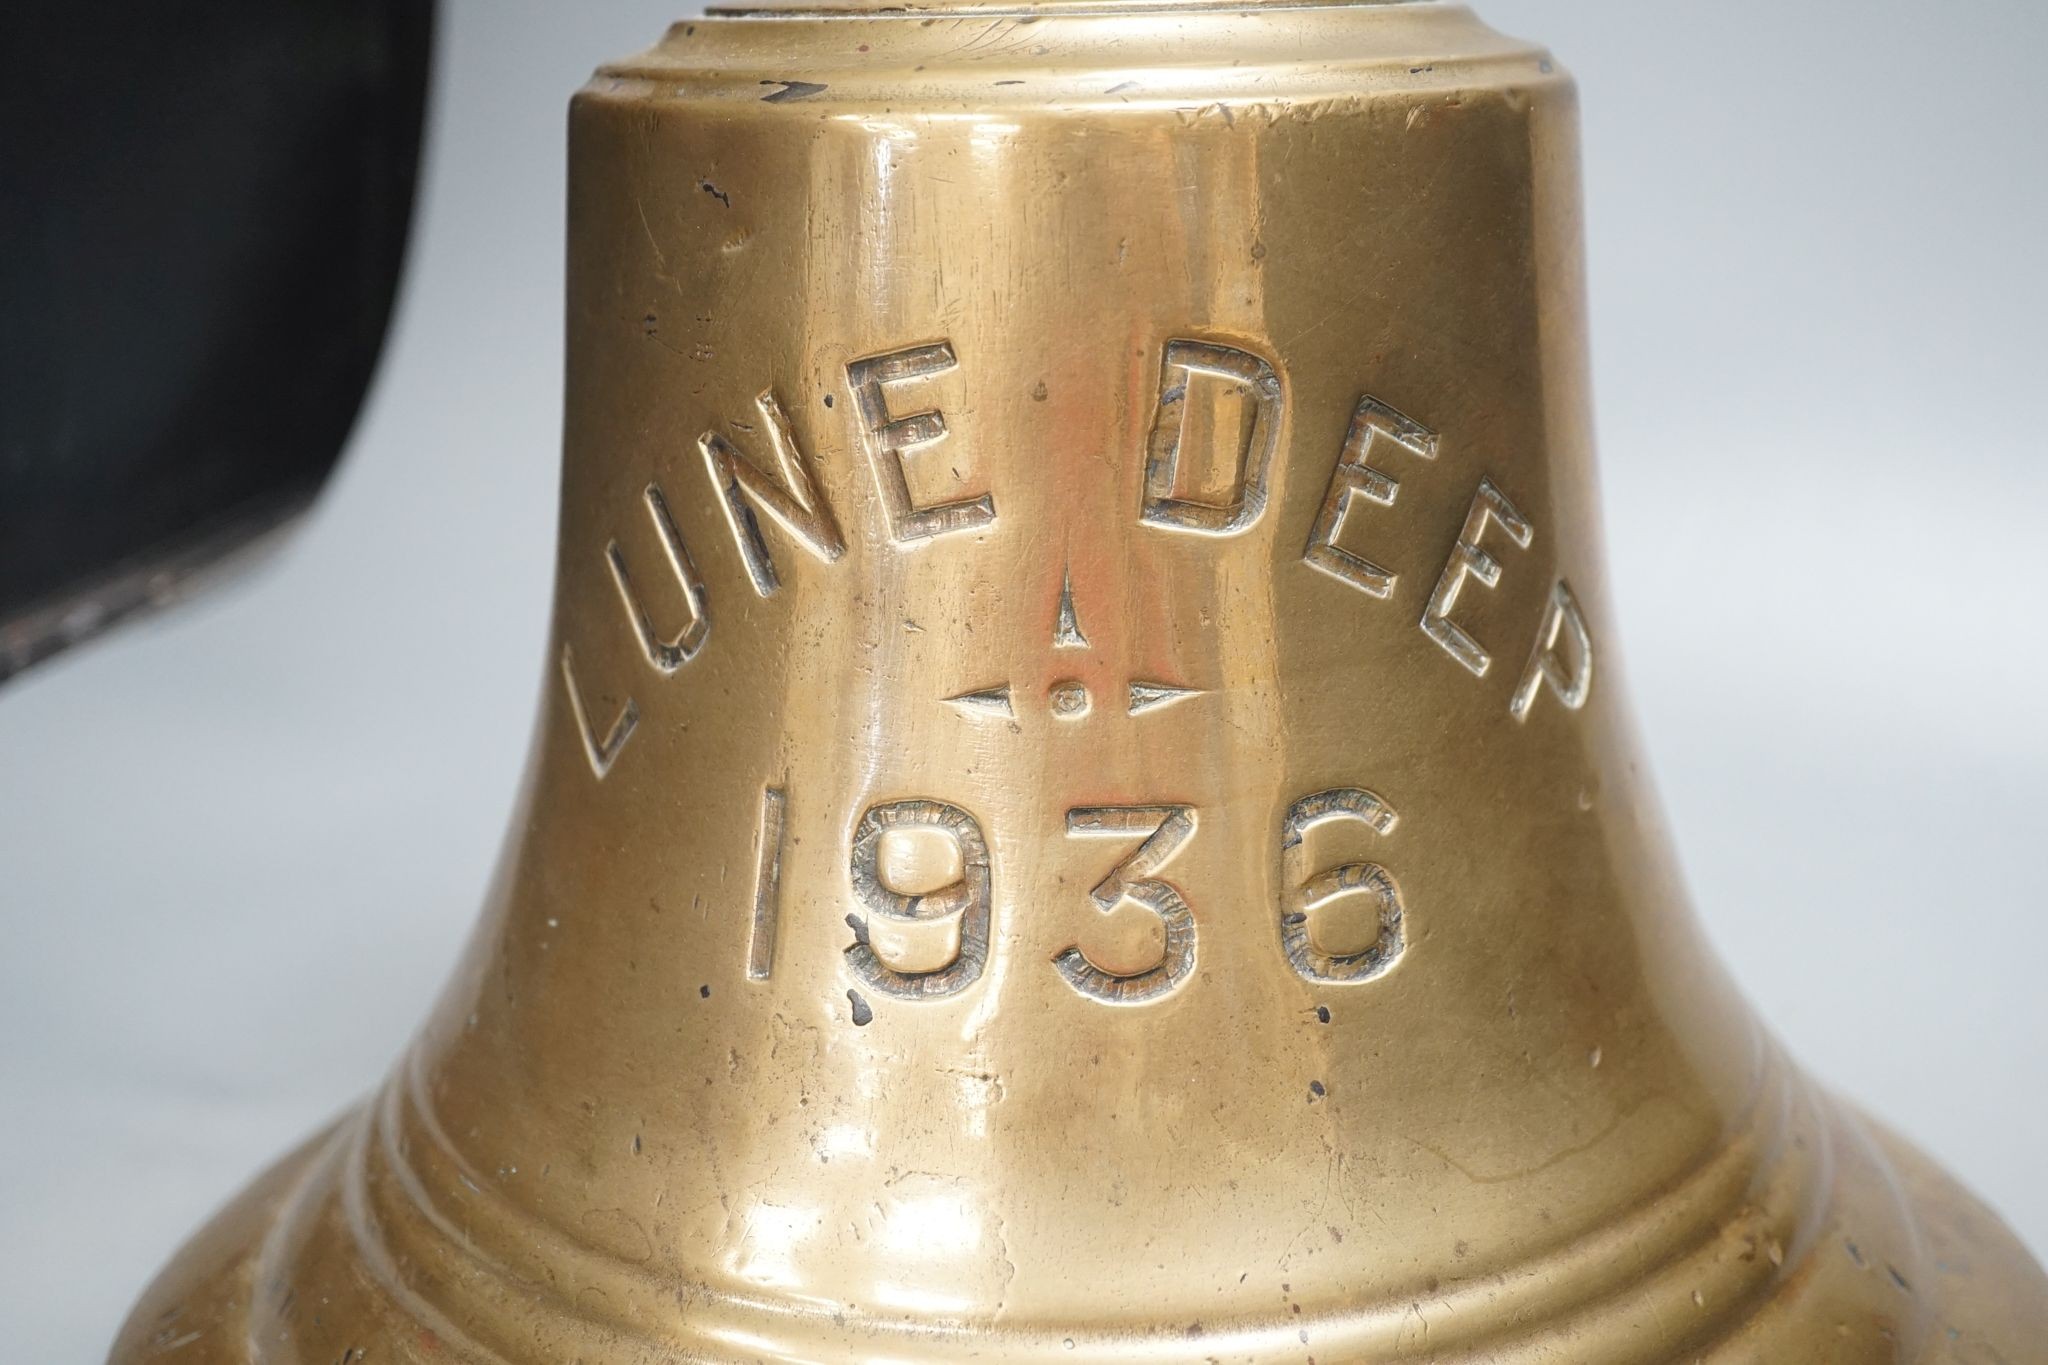 A bronze ship's bell, ‘Lune Deep 1936’, 25cm, MV `Lune Deep' O.N. 164624, was a 190ft self-propelled hopper barge built in 1936.